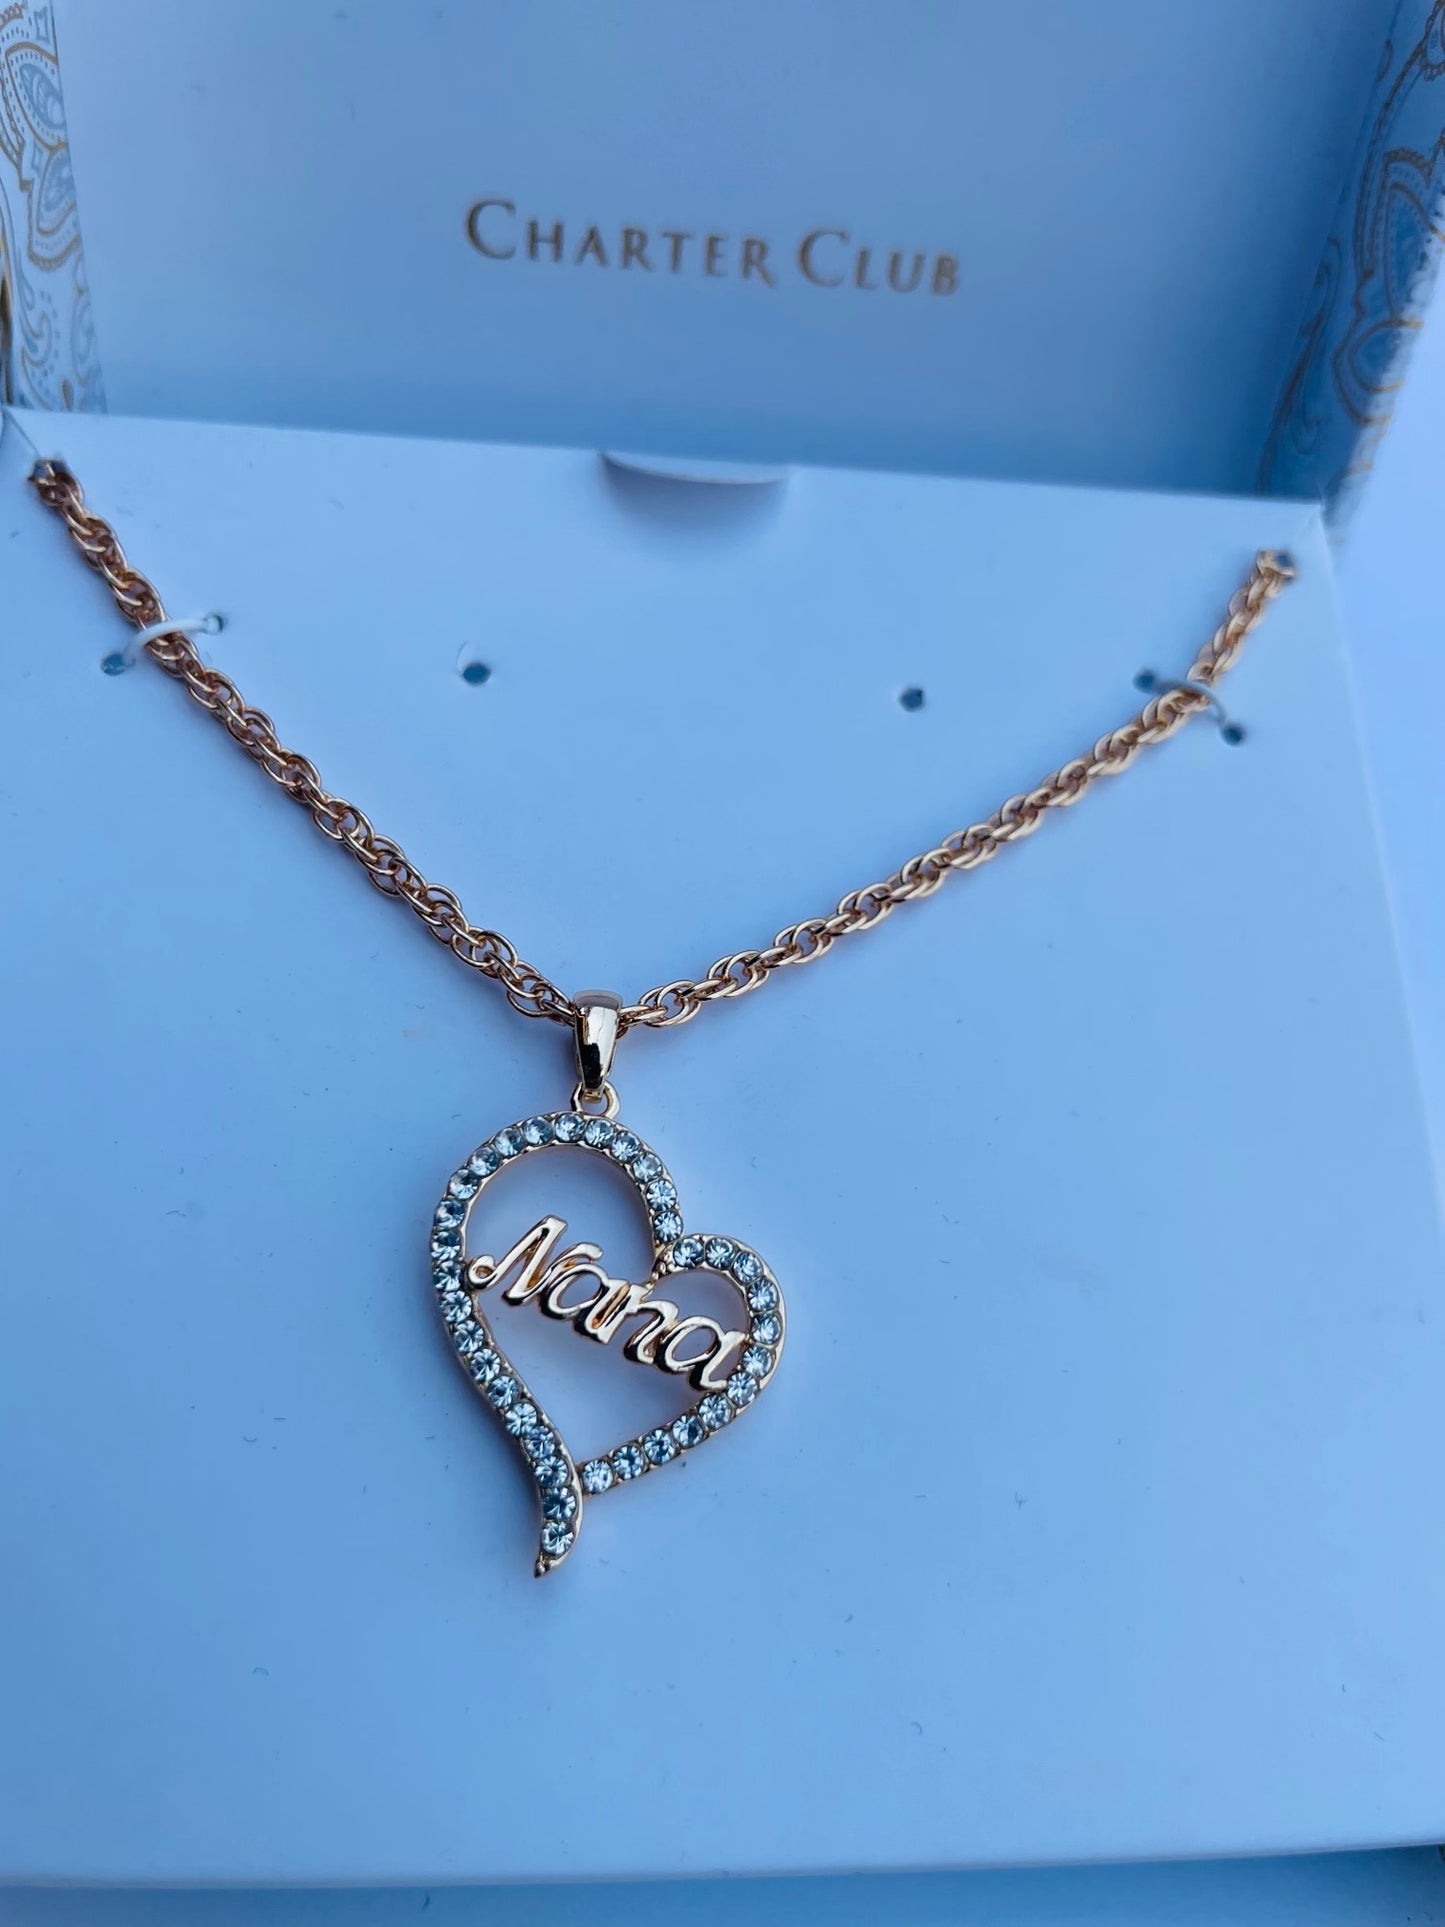 Charter club heart necklace